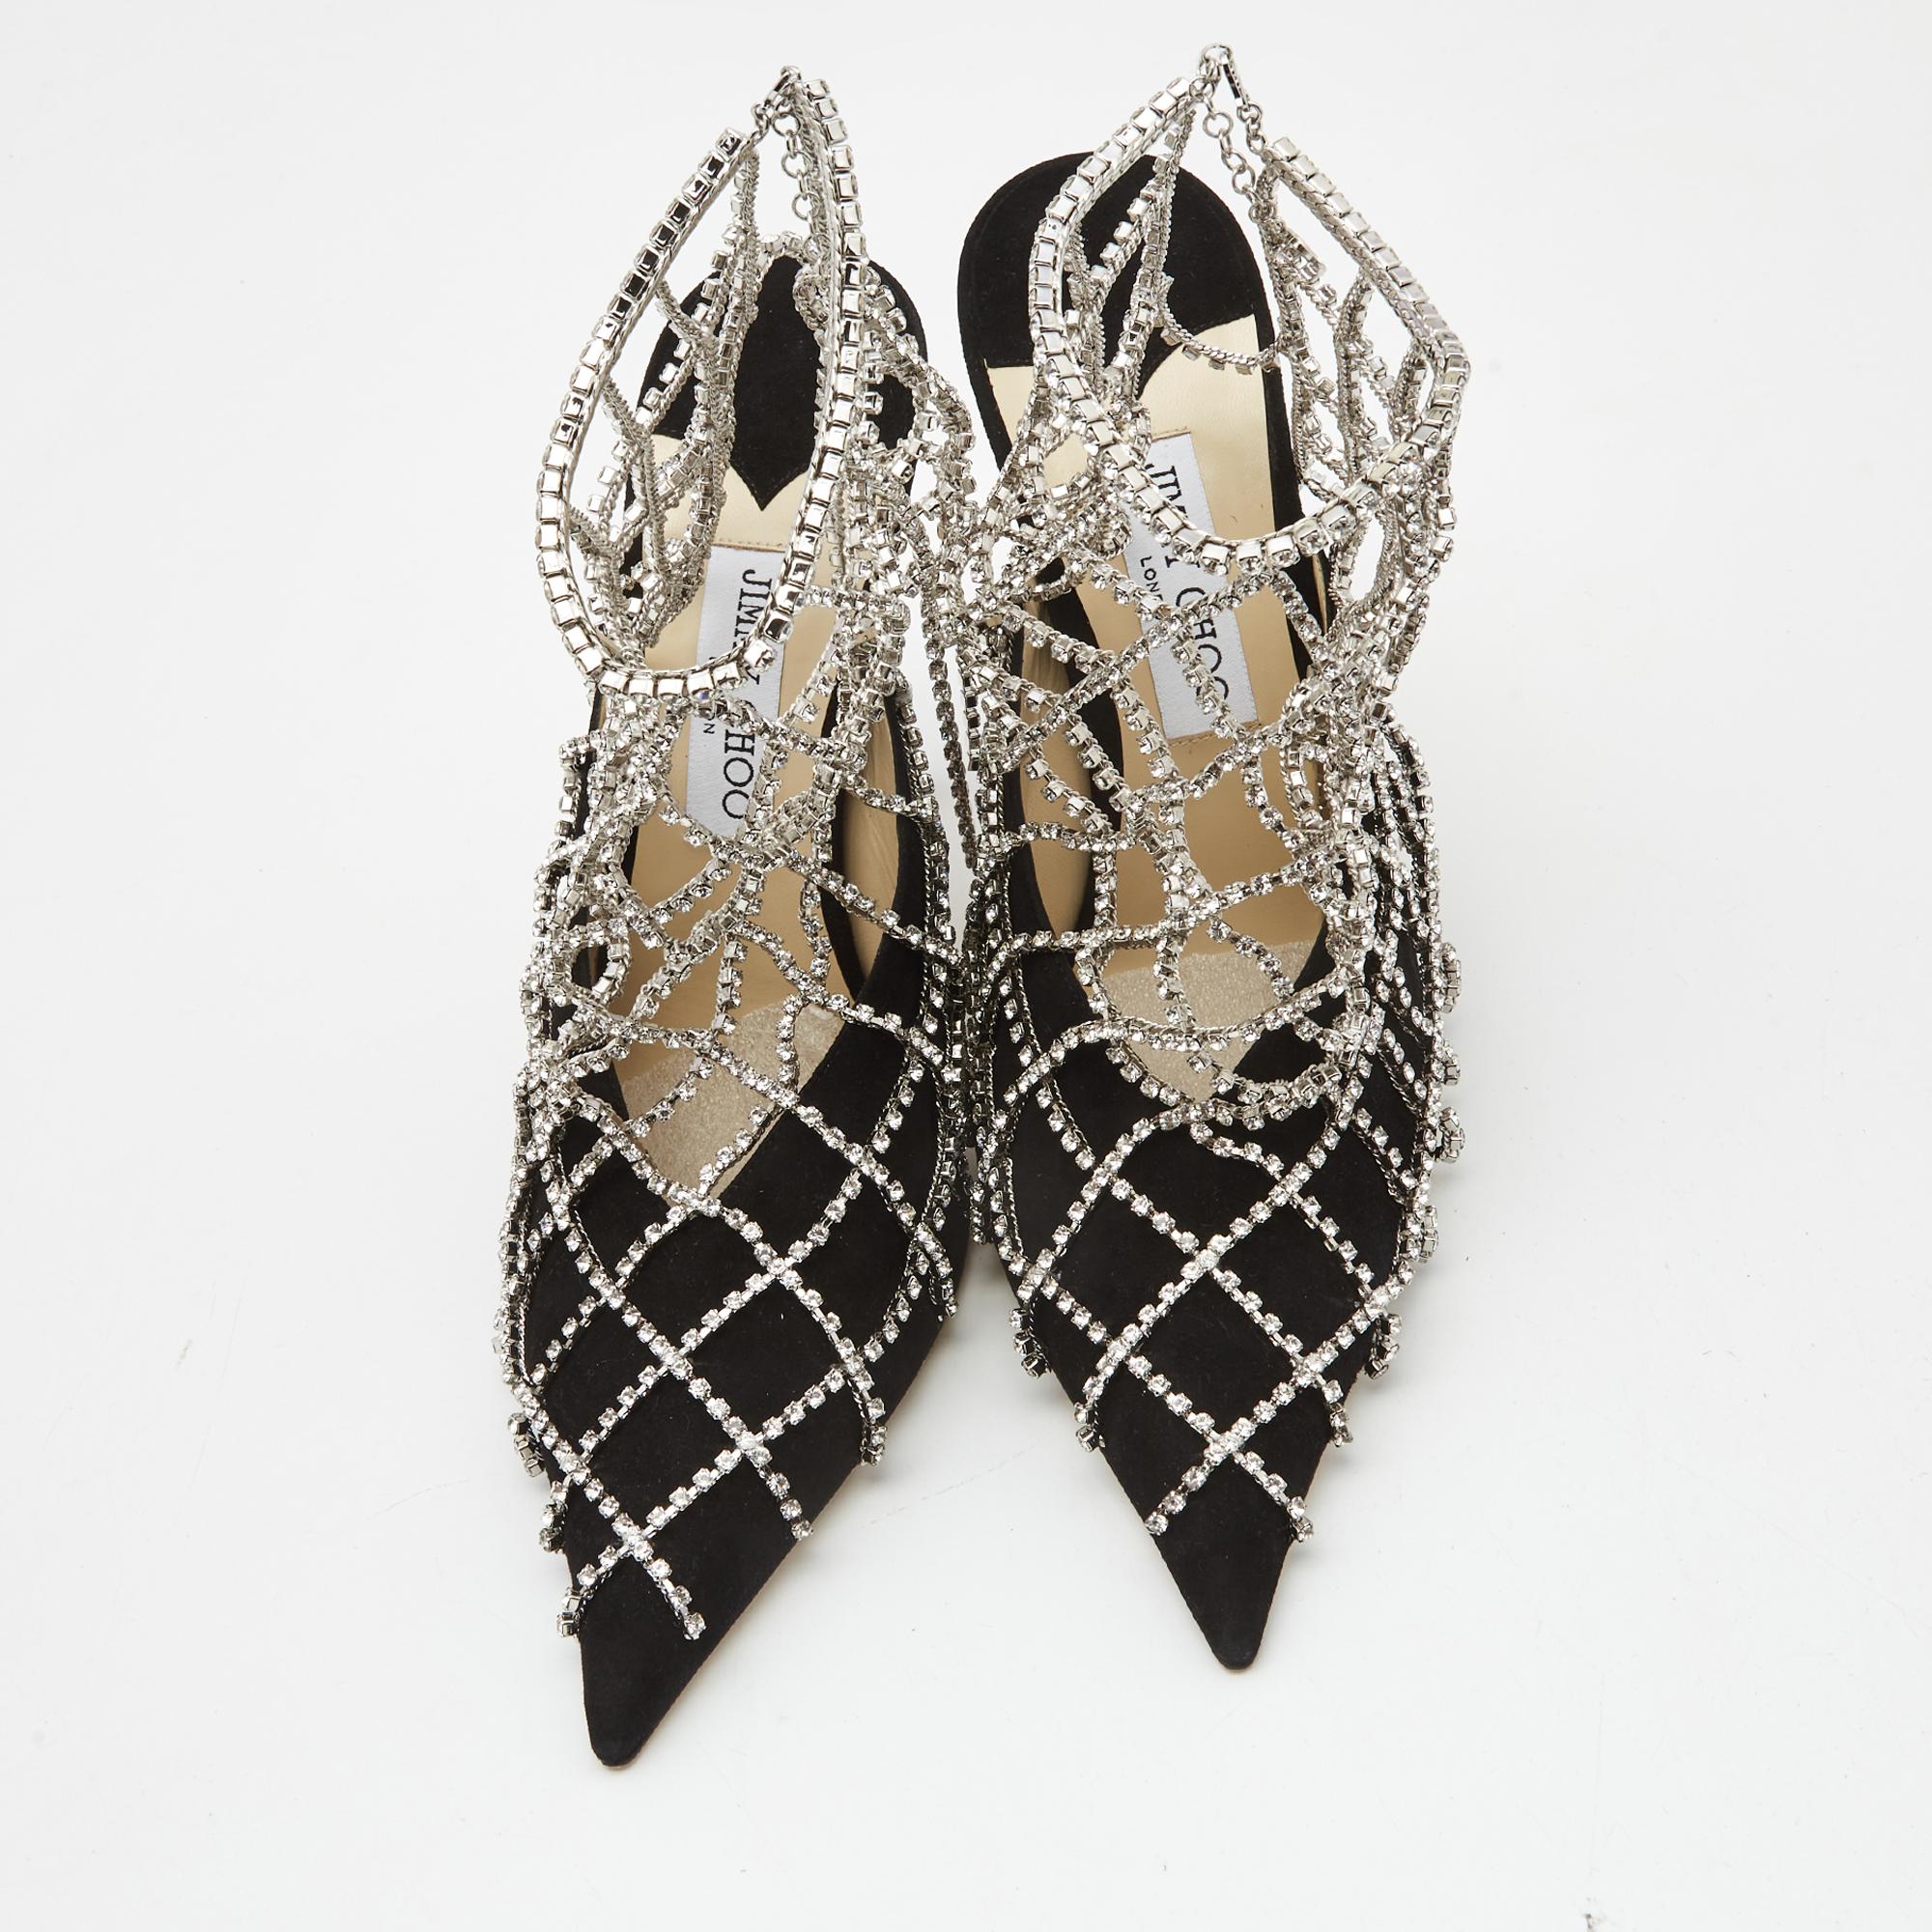 Jimmy Choo yet again brings a stunning set of booties that makes us marvel at its beauty and craftsmanship. Crafted from black suede, they are cloaked with a panel of crystal embellishments for the right amount of sheen! Wear these shoes to nail the